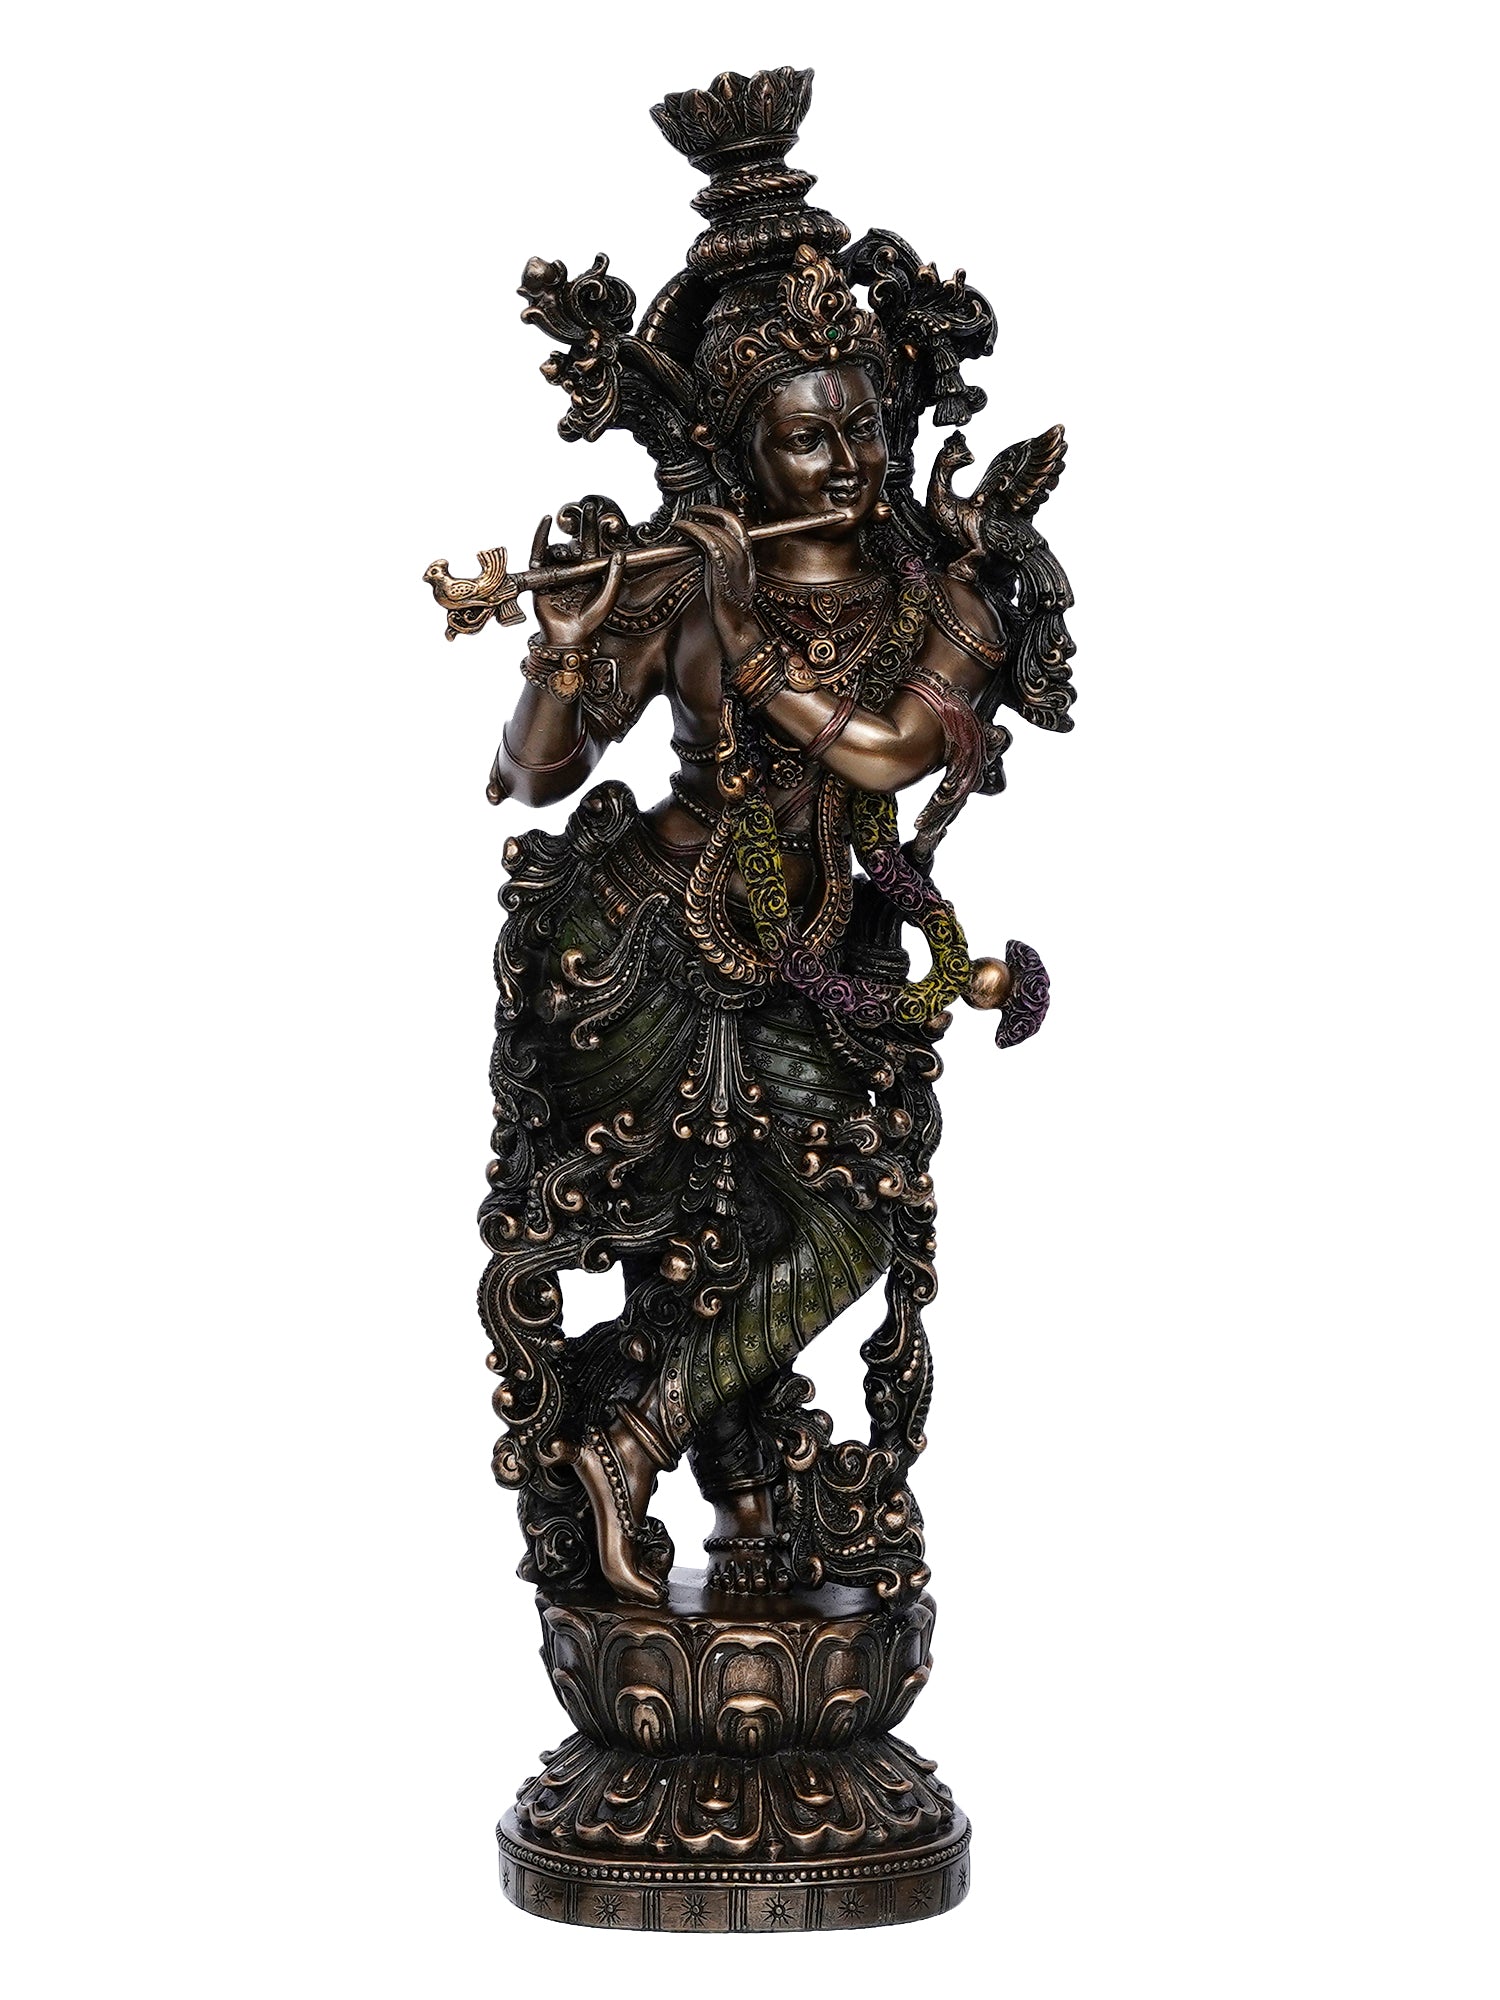 Brown Polyresin and Bronze Decorative Ethnic Carved Dancing Lord Krishna Playing Flute Figurine 2